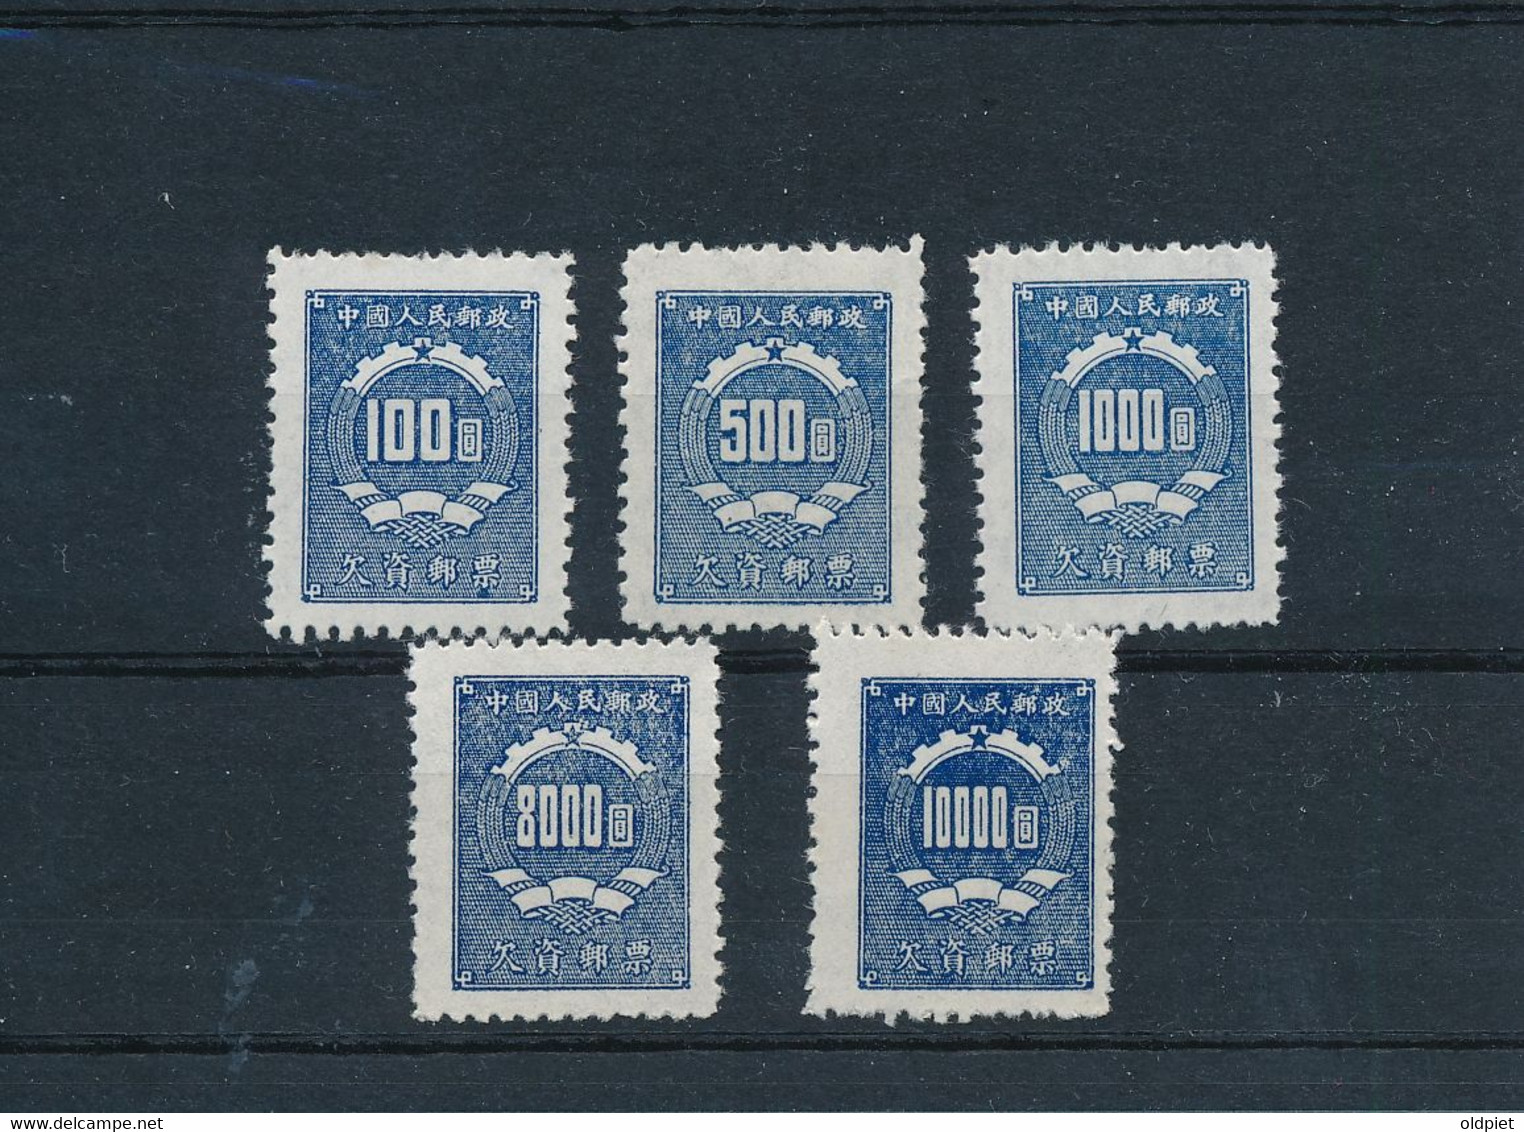 P.R. CHINA Postage Due Stamps Portomarken 1950 - Mi # 1, 3, 5, 8, 9 Mint No Gum (*) Digits In The Coat Of Arms - Timbres-taxe